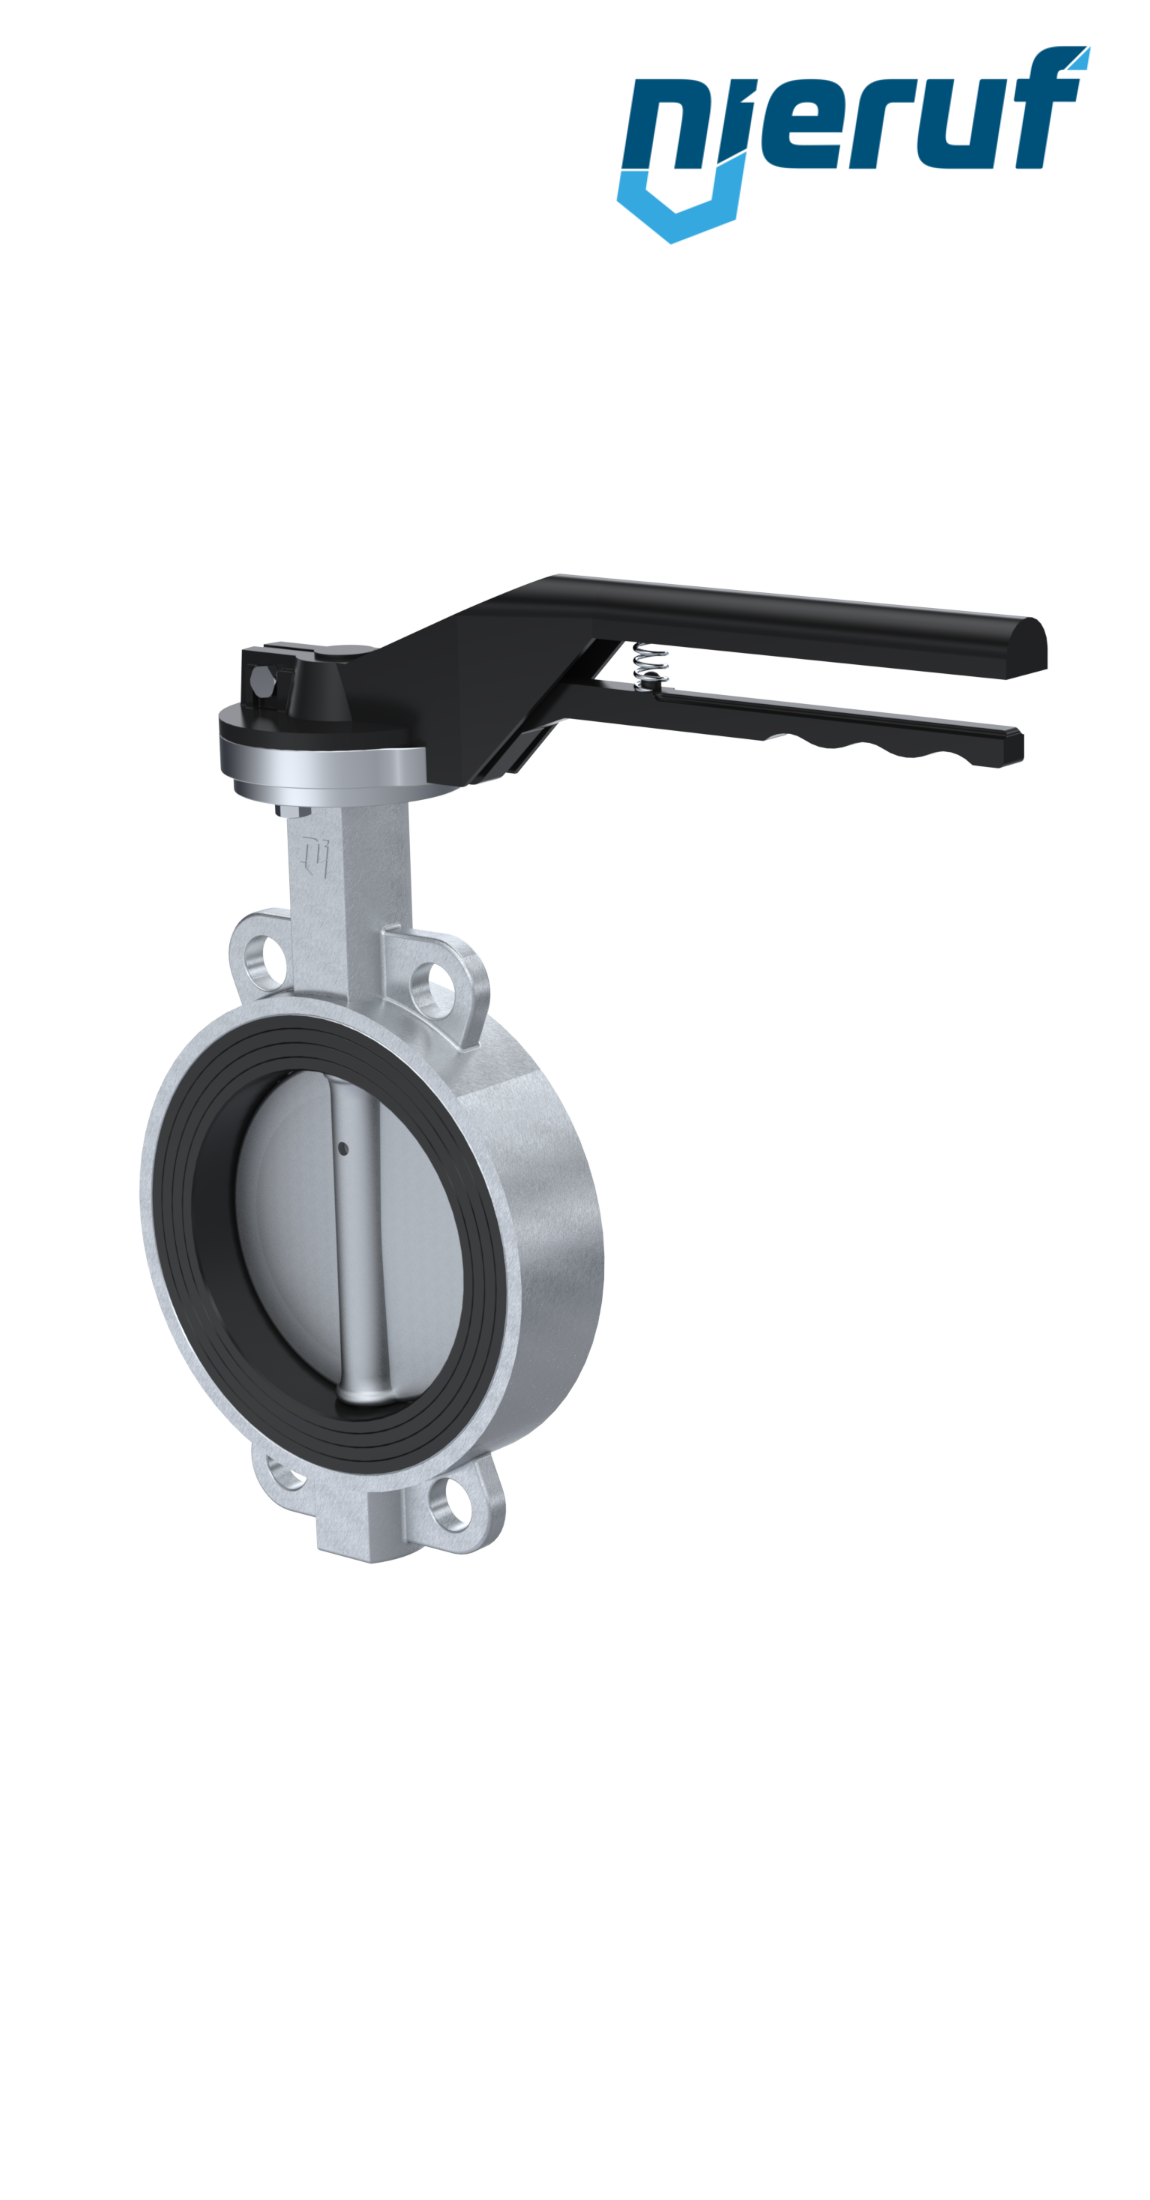 Butterfly-valve-stainless-steel DN300 PN16 AK08 EPDM notch lever